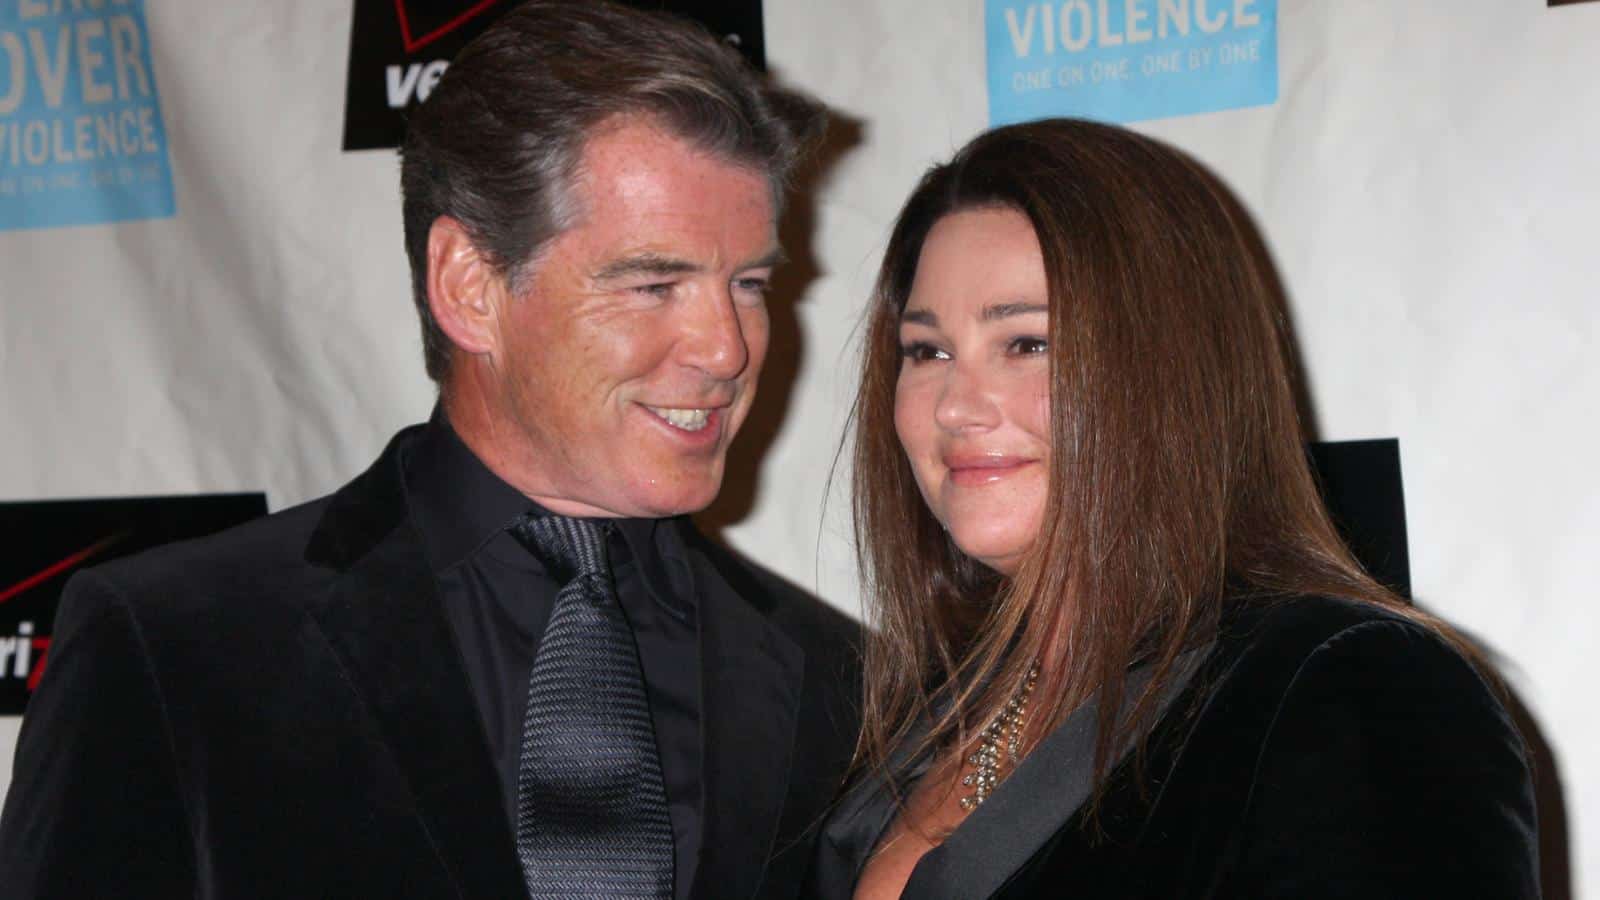 Pierce Brosnan and Keely Shaye Smith carrie-nelson _ Shutterstock.com